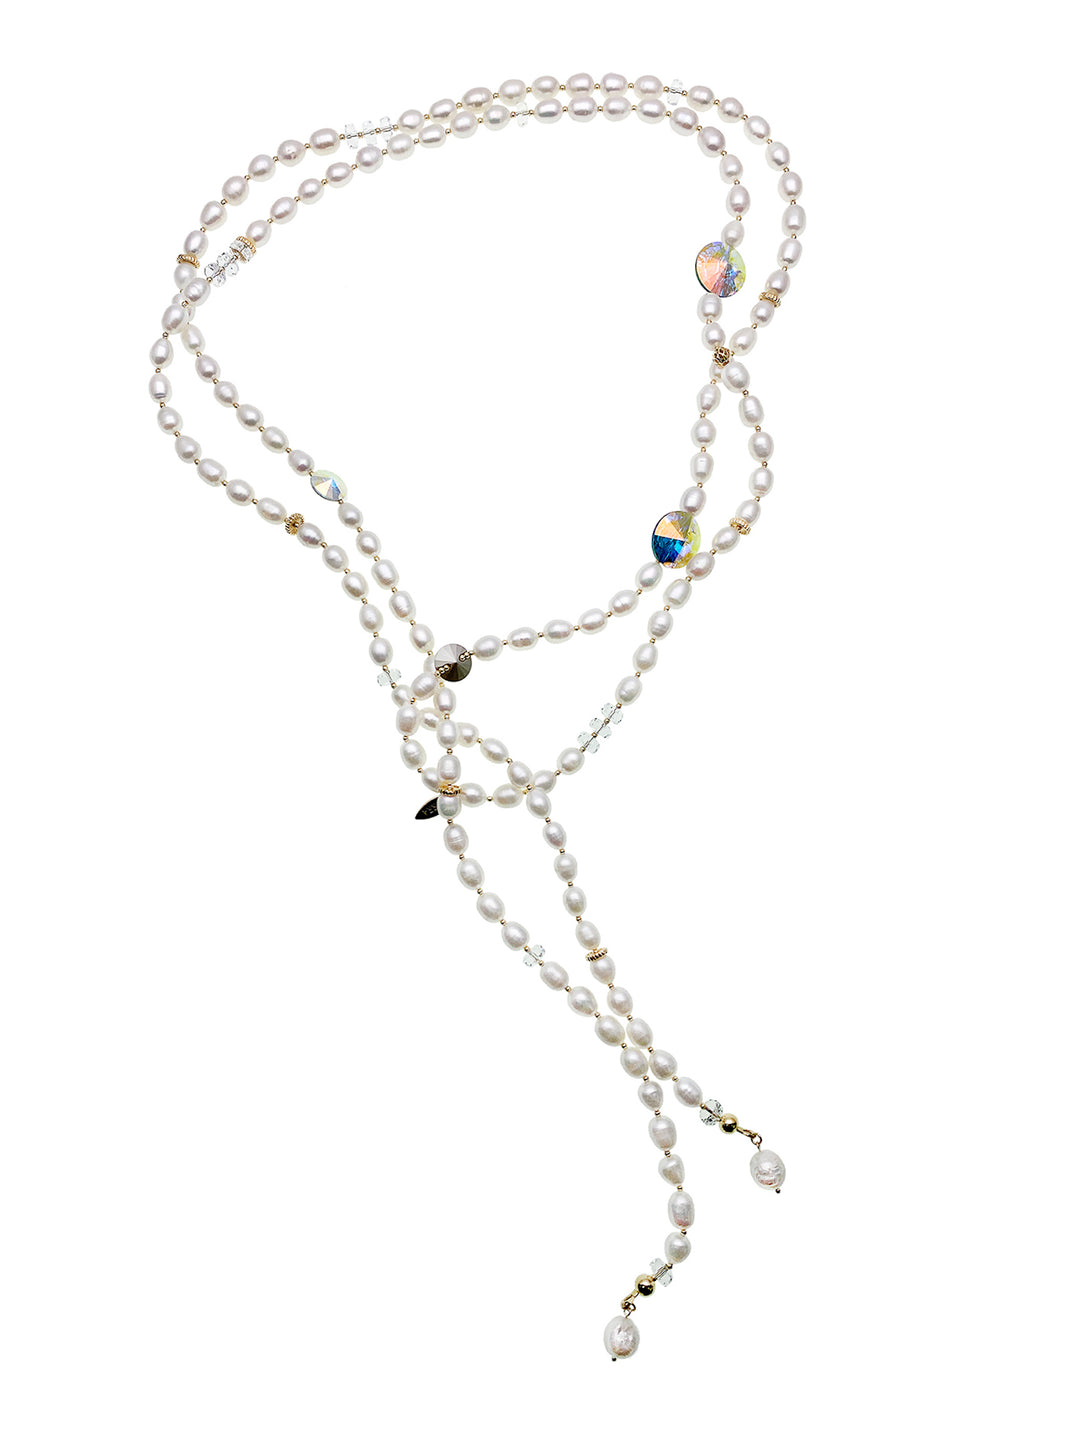 Freshwater Pearls With Swarovski Crystals Open Ended Long Necklace EN045 - FARRA